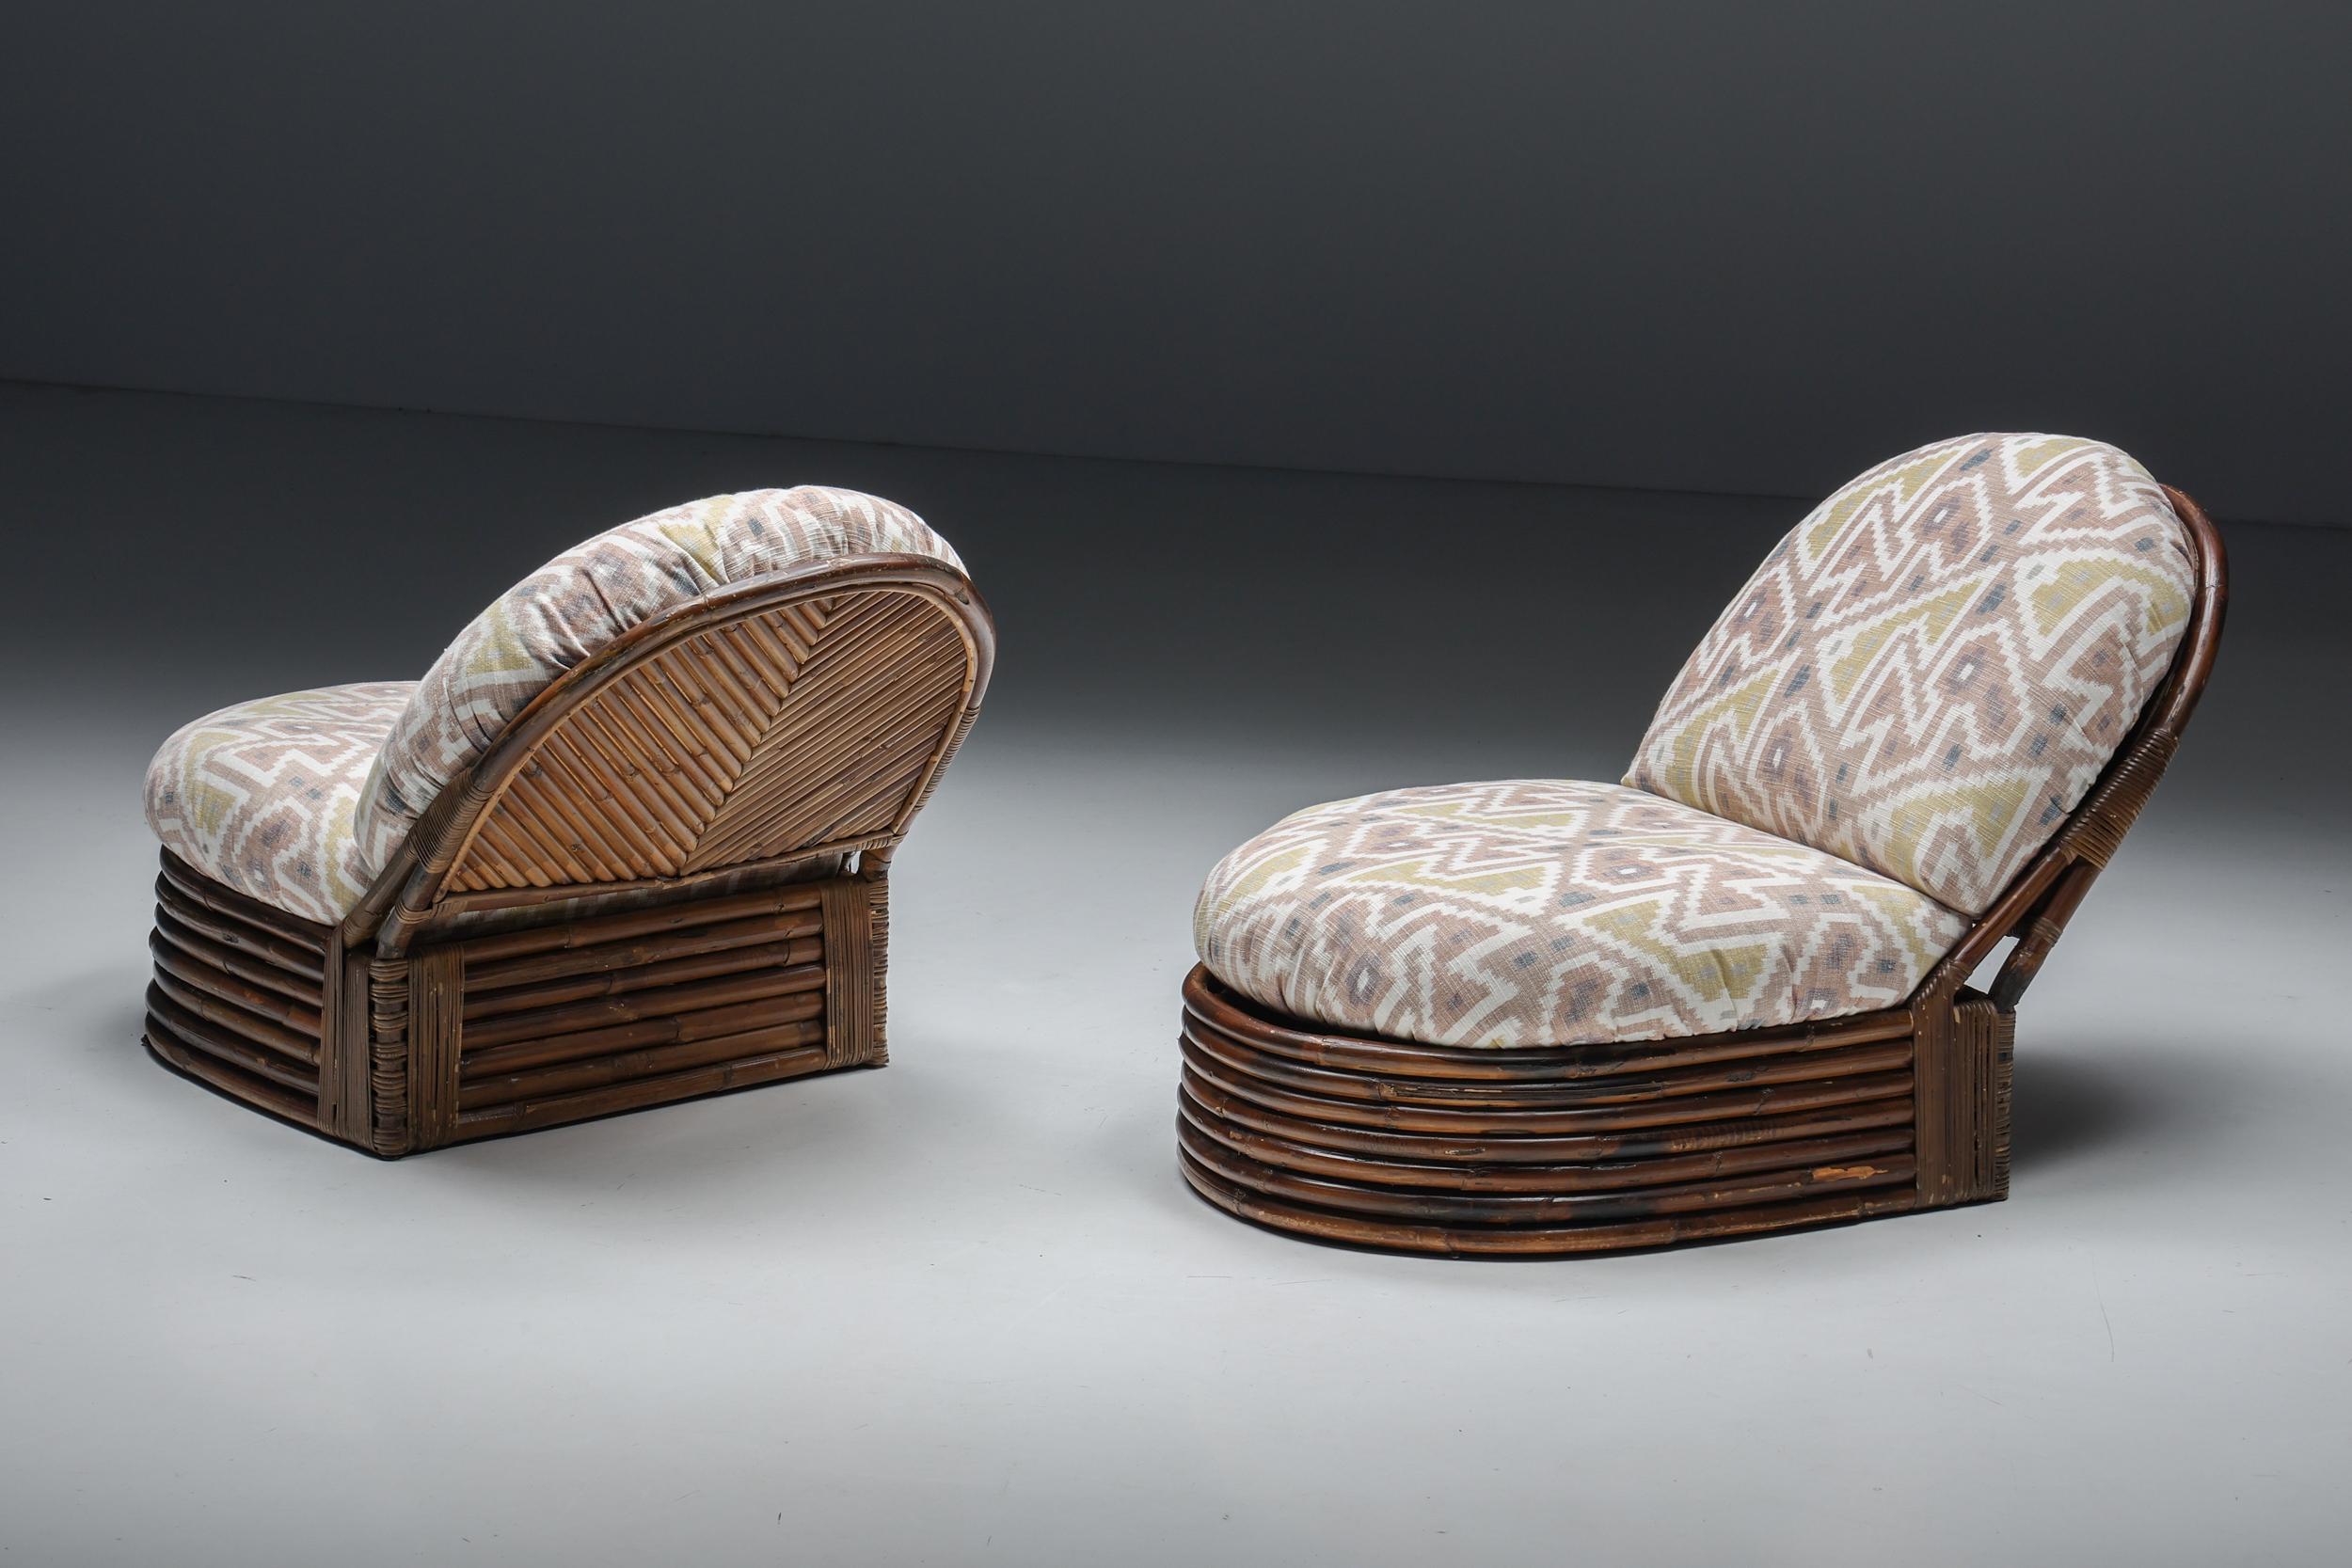 Vivai Del Sud Bamboo Lounge Chairs, Pierre Frey Jacquard, 1970s In Excellent Condition For Sale In Antwerp, BE